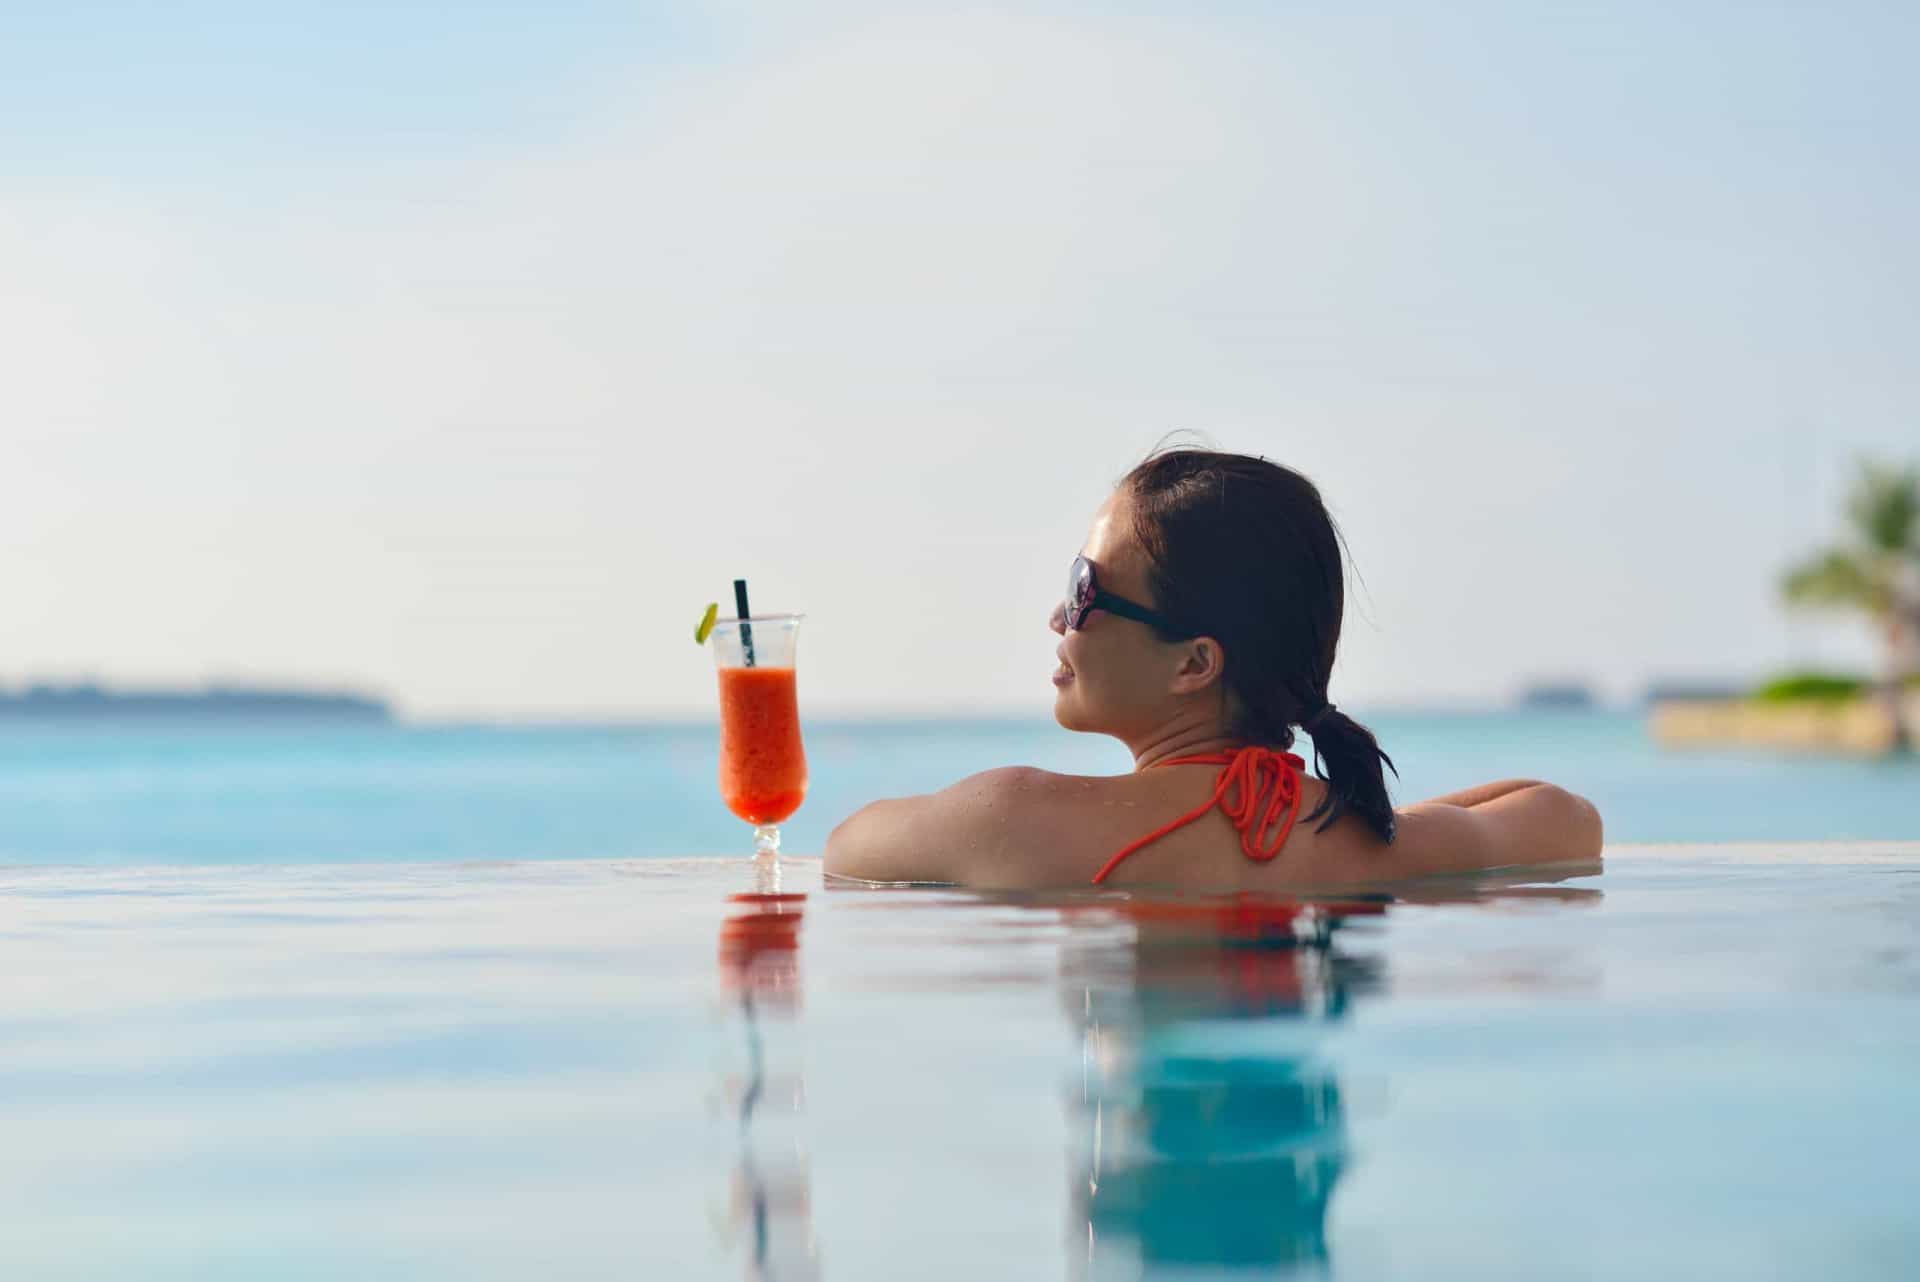 <p>While all those arduous tasks are wonderful, the reality of visiting the Maldives is that it is all about <a href="https://www.starsinsider.com/celebrity/402580/how-do-your-favorite-celebrities-relax" rel="noopener">relaxation</a> and luxury. The resorts are designed to cater to your every need, so sit back and enjoy!</p>